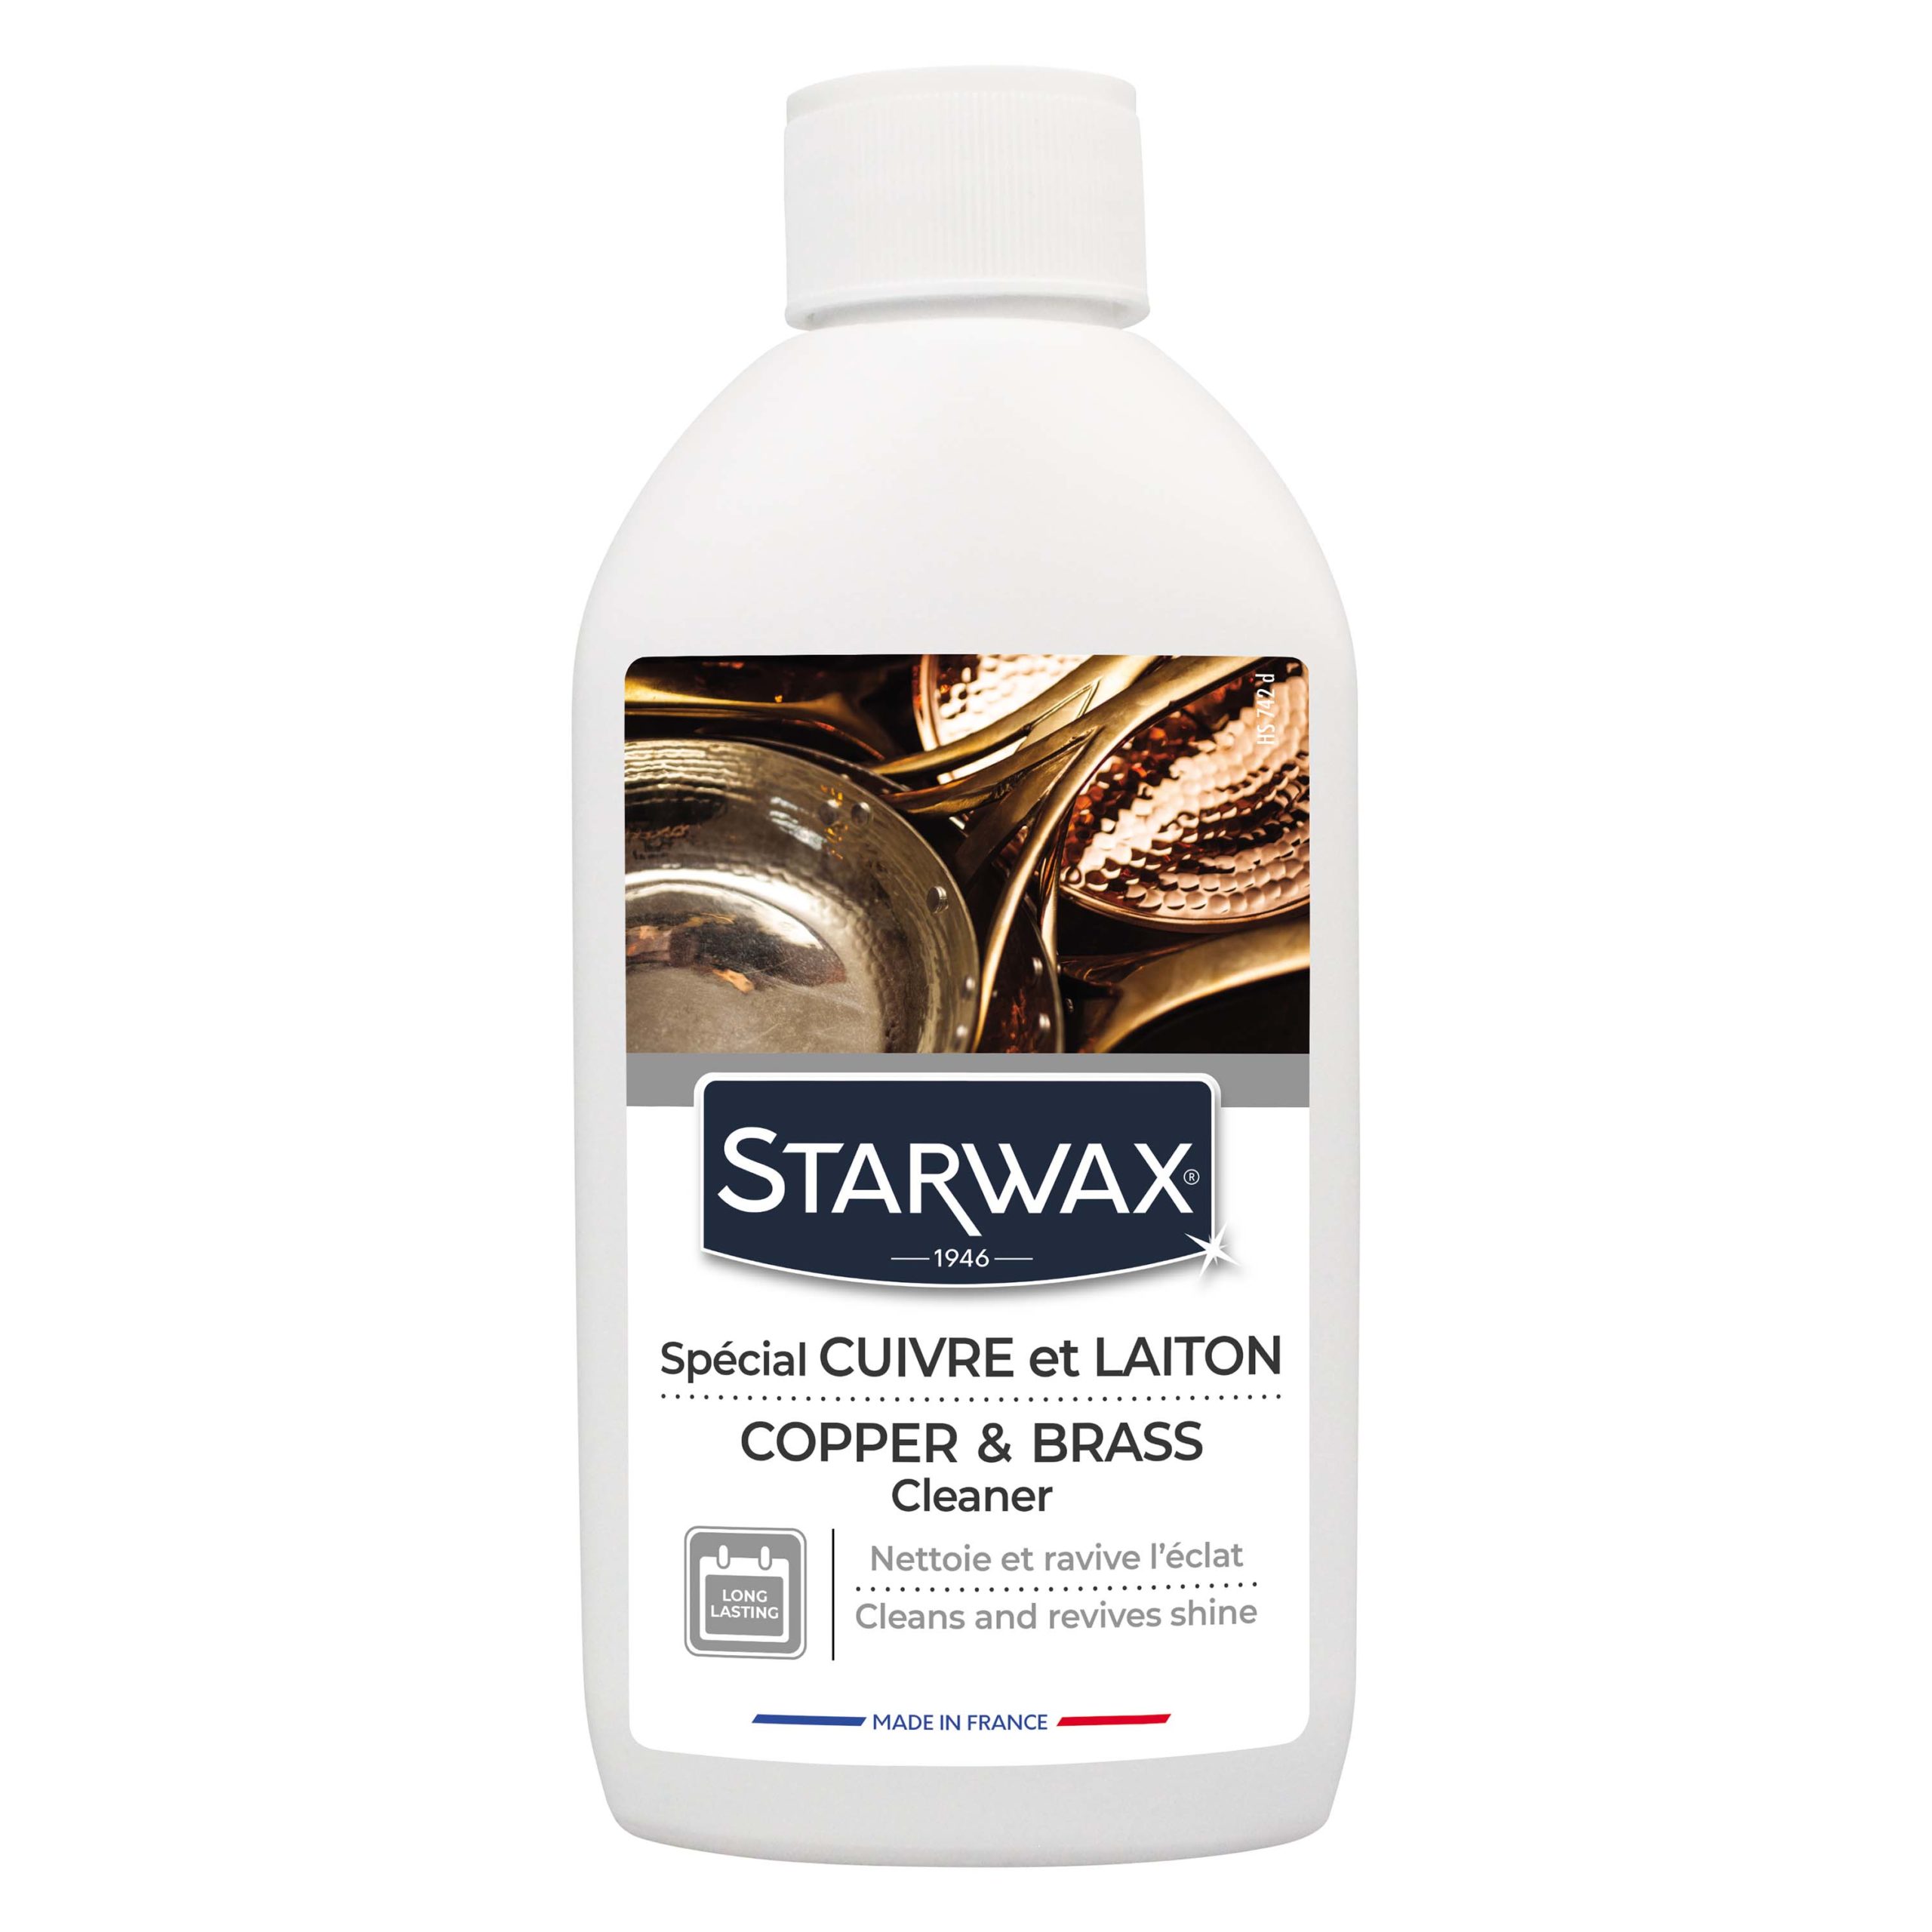 Copper & brass cleaner  Starwax, cleanliness of the house